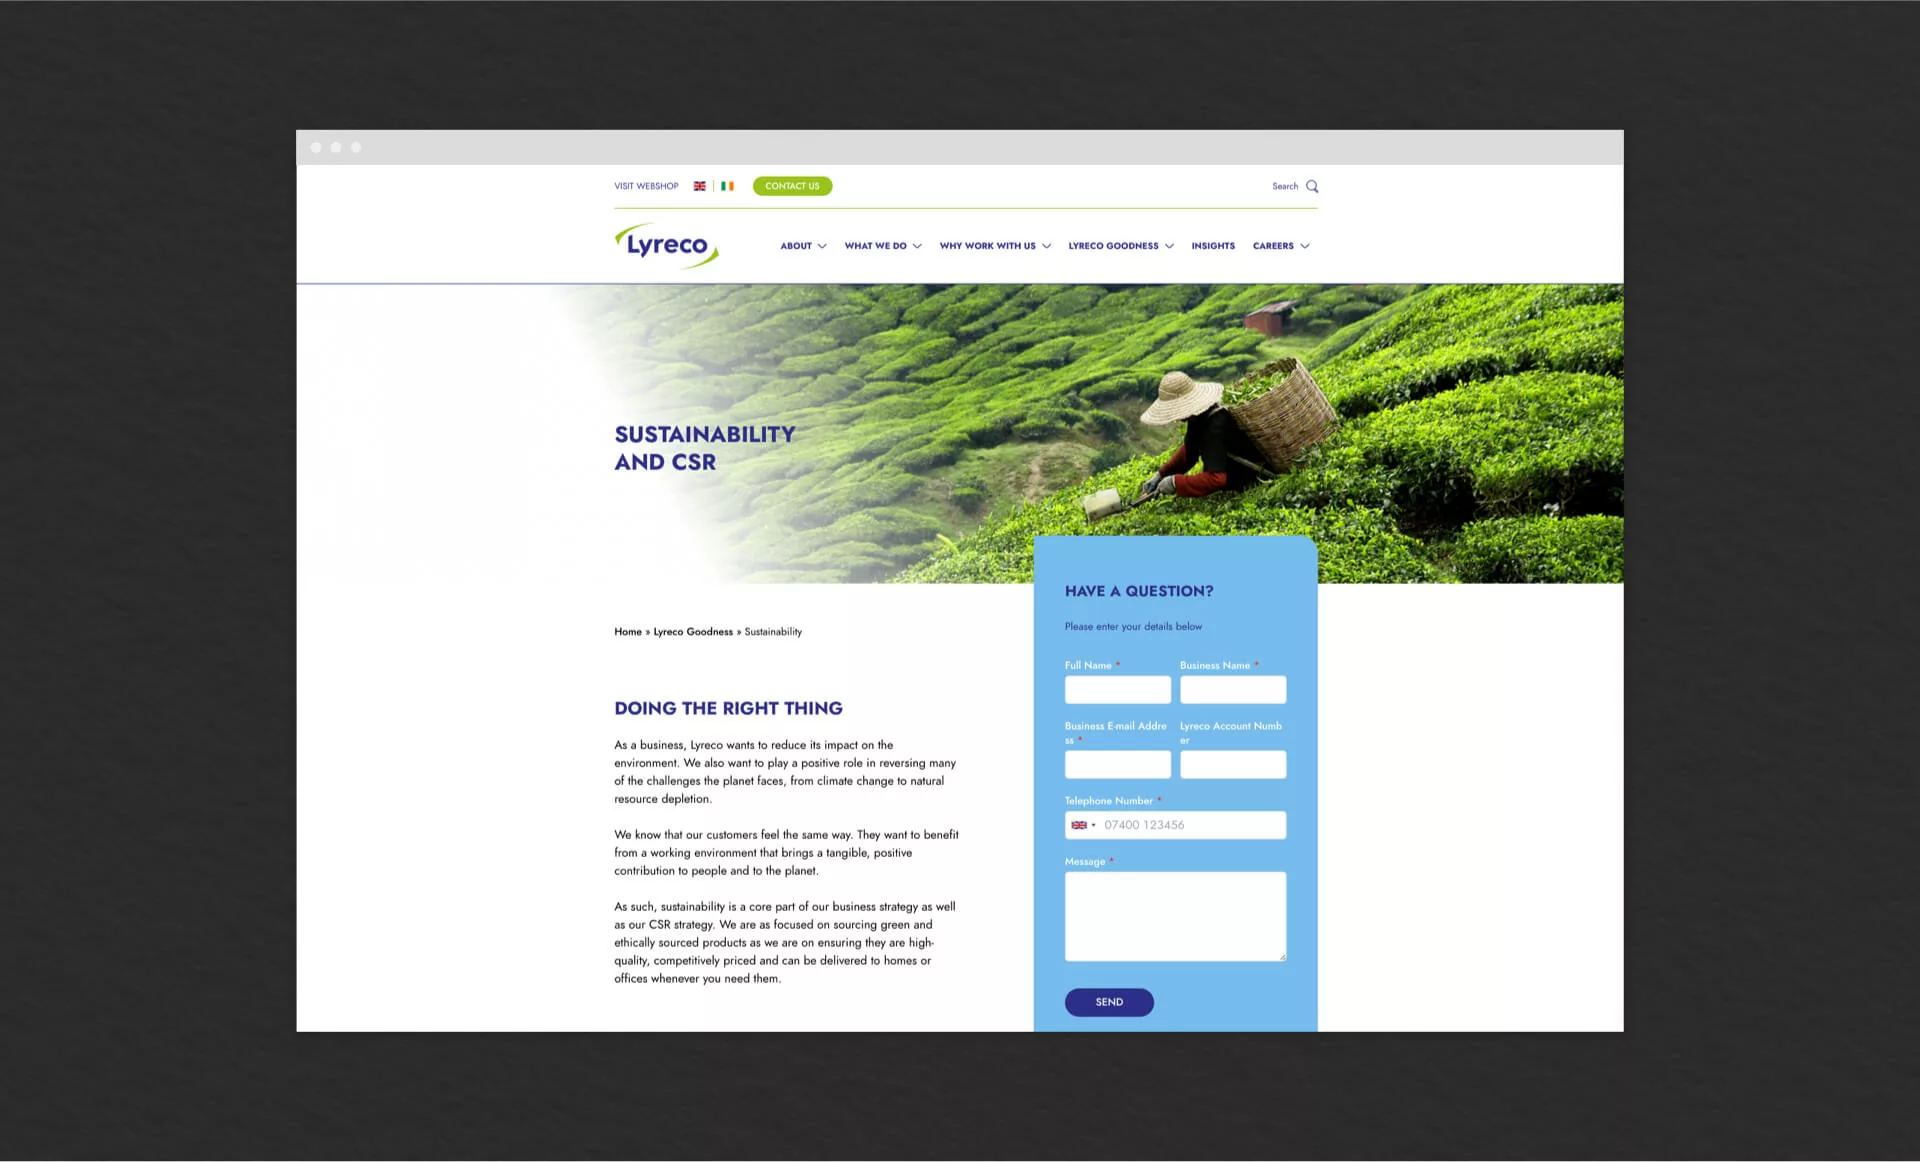 A mockup of the Sustainability and CSR page on the Lyreco Goodness website